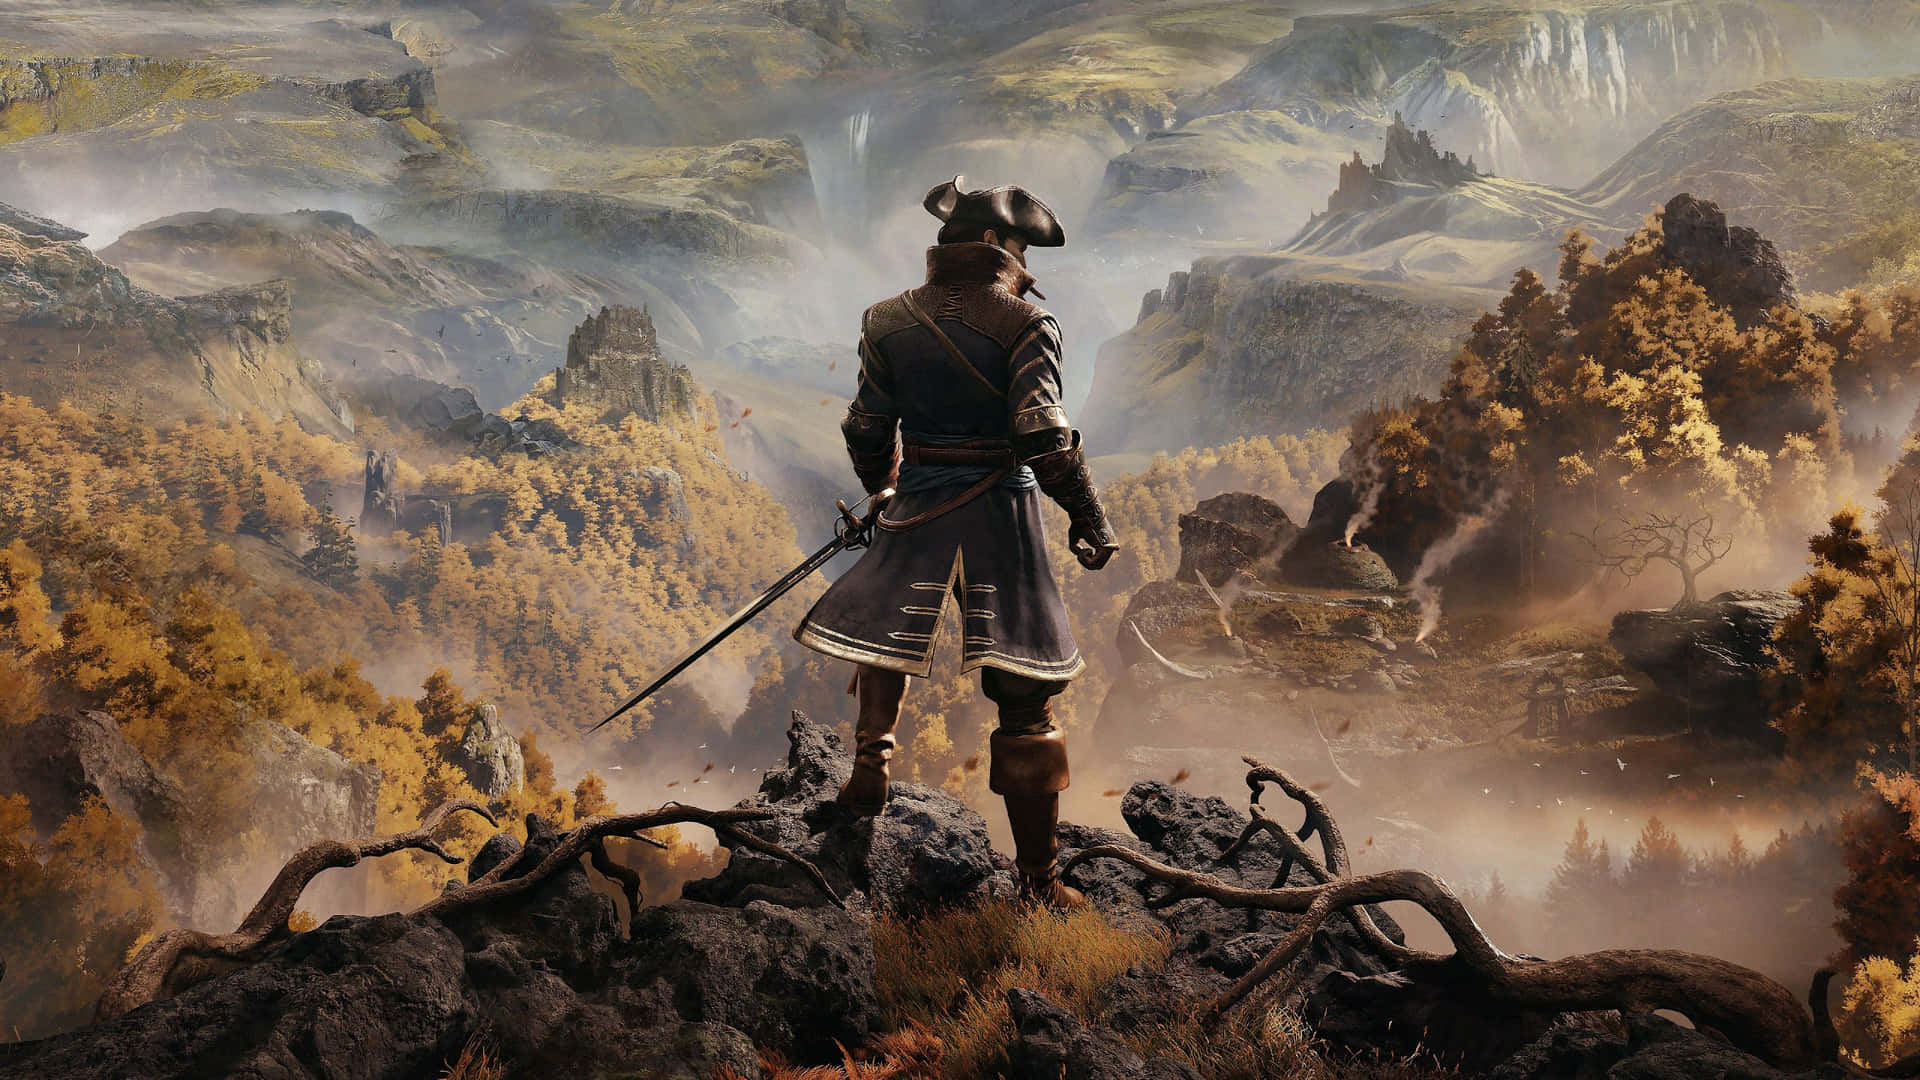 Explore the magical and mysterious world of Greedfall.